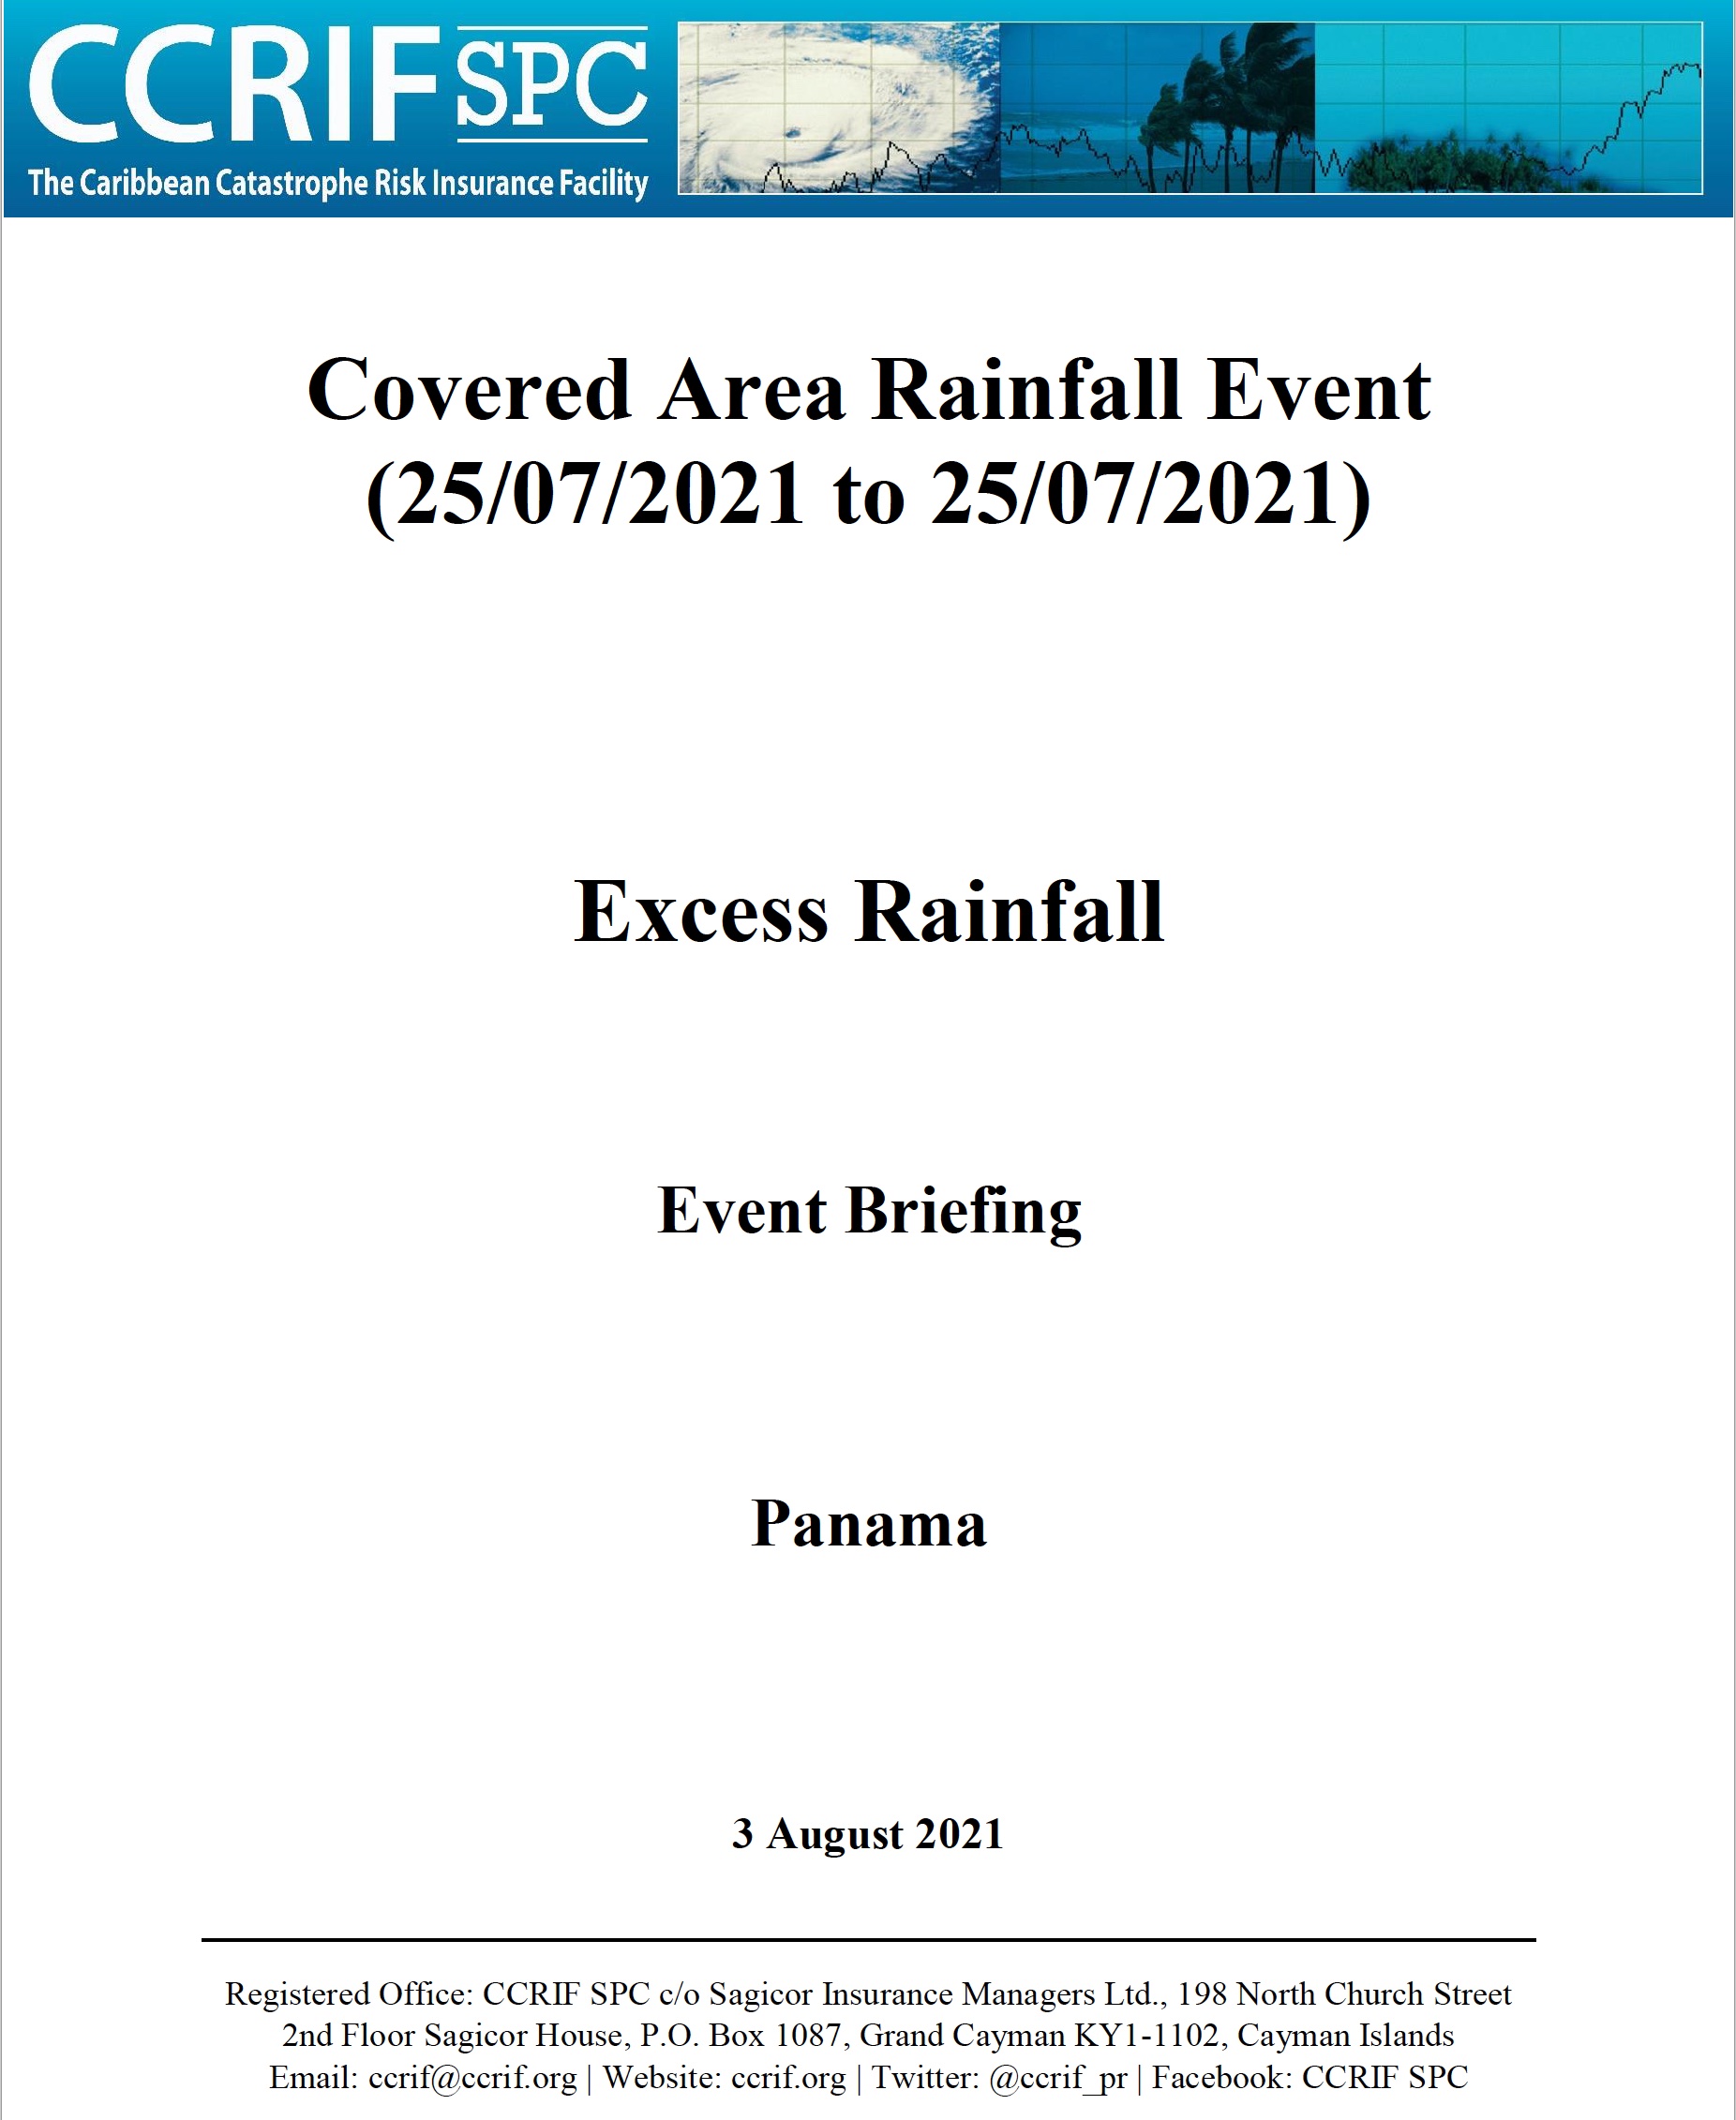 Event Briefing - Covered Area Rainfall Event - Excess Rainfall - Panama - August 3 2021